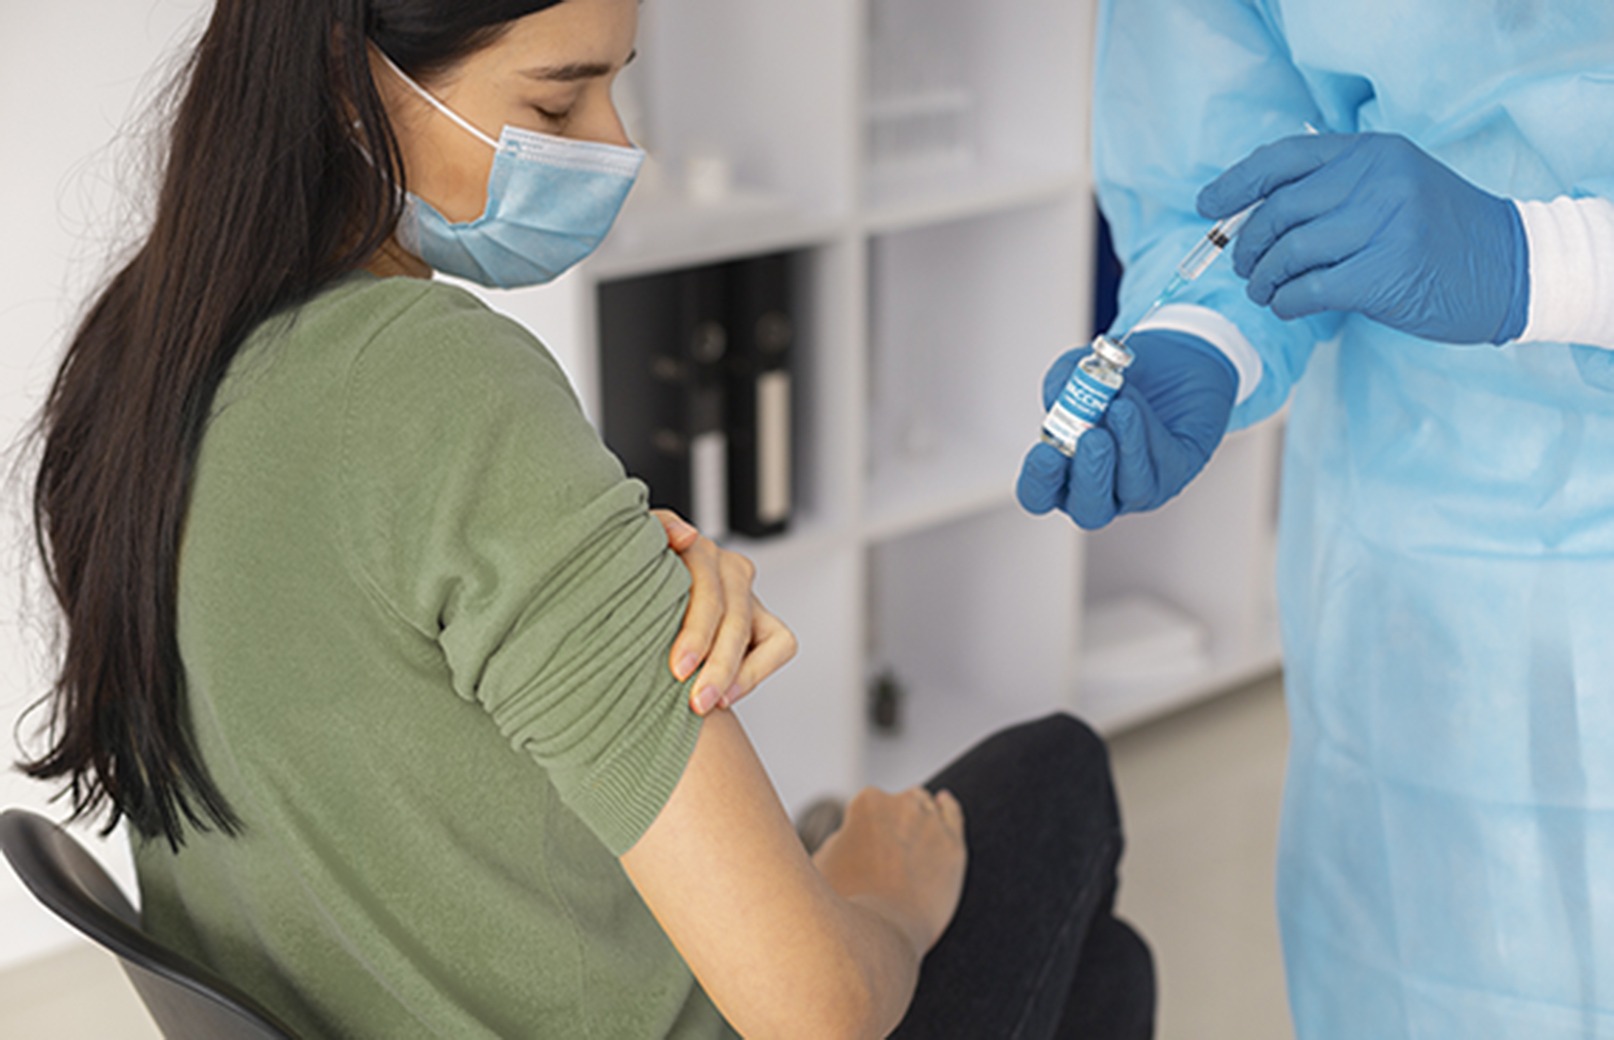 Female patient receiving COVID-19 vaccination